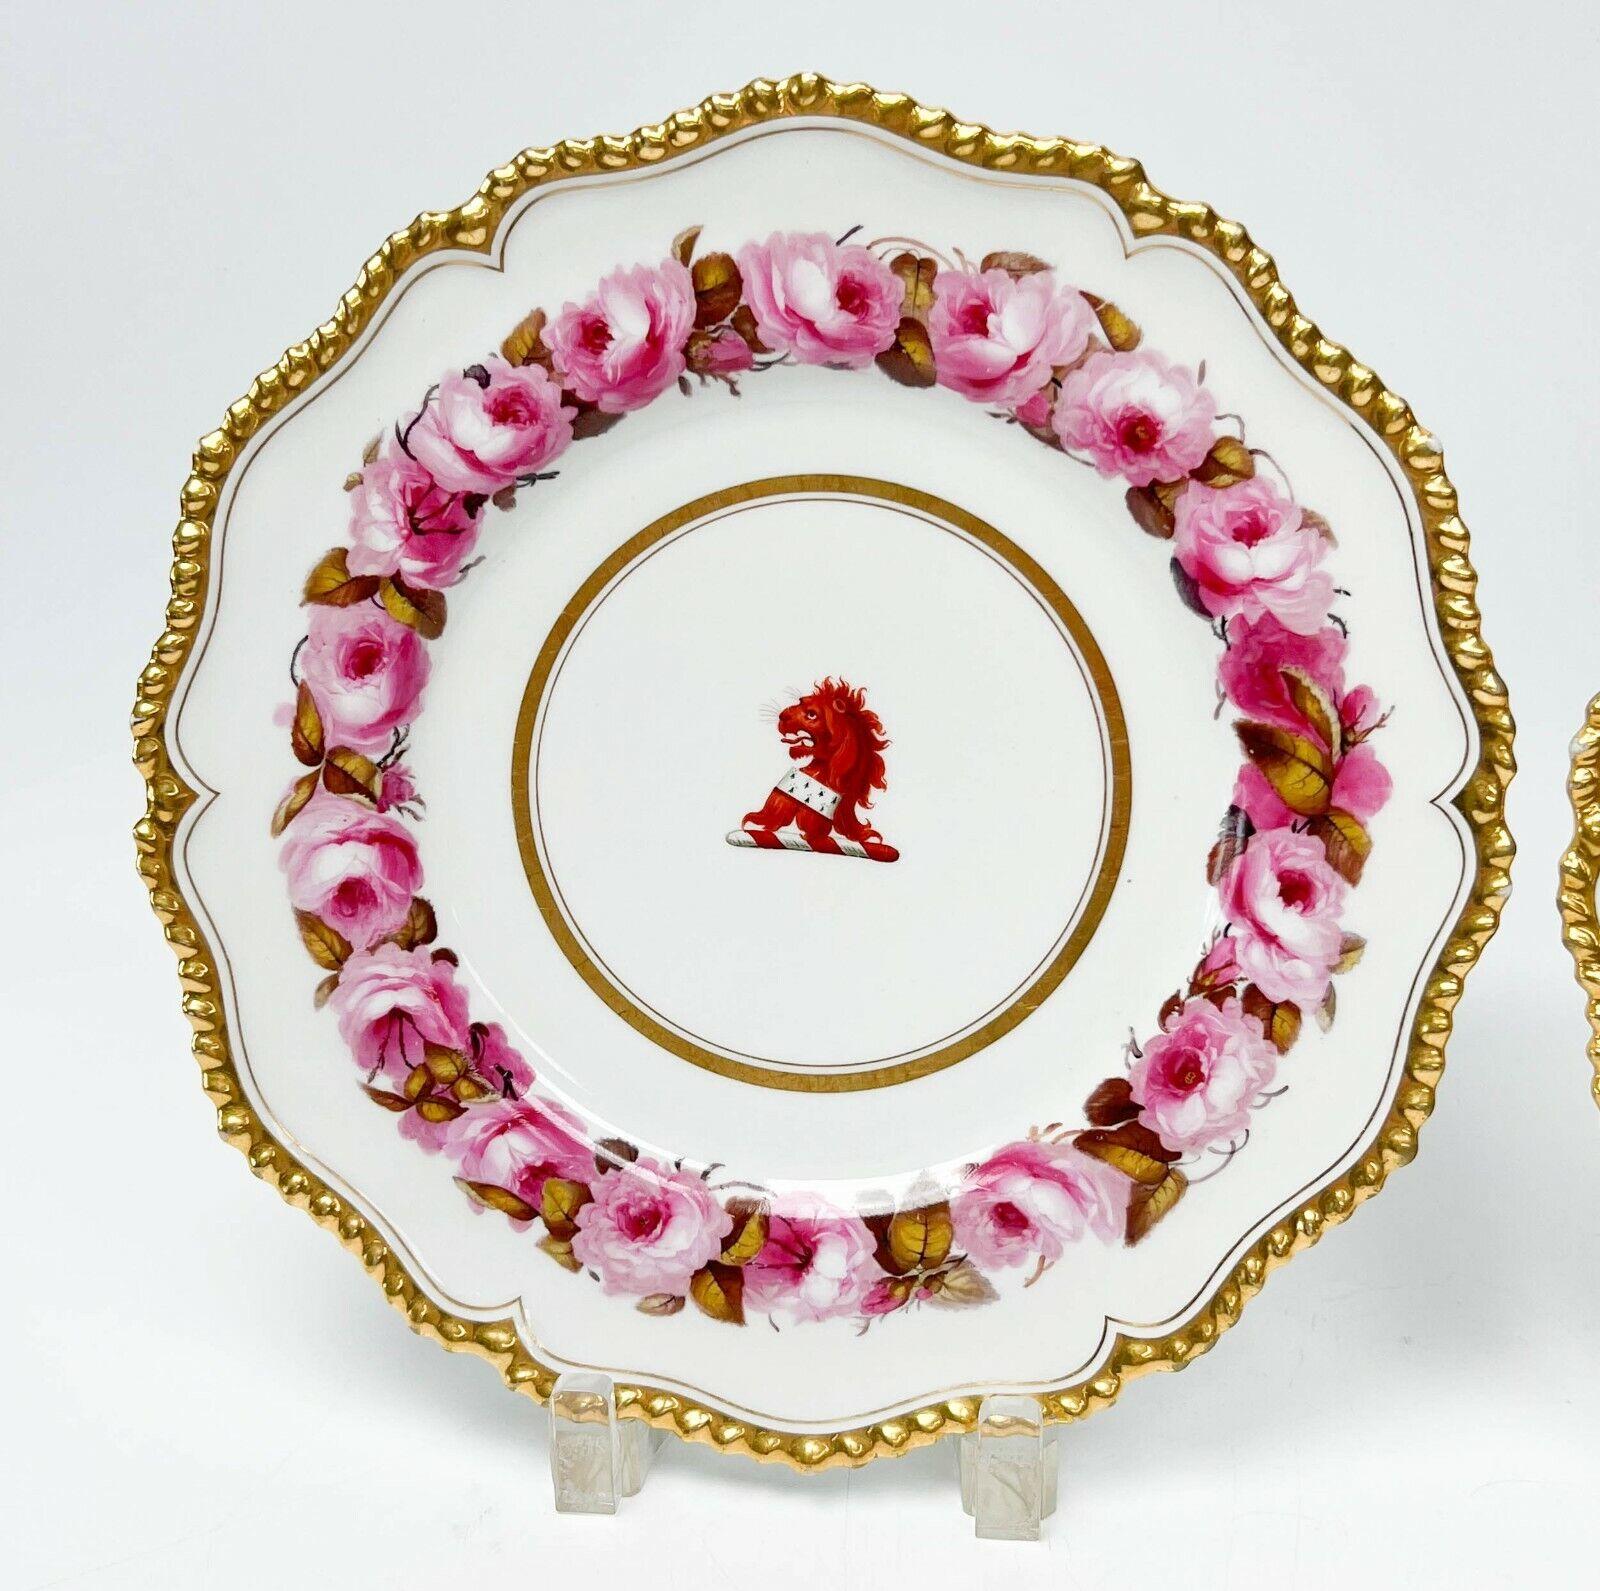 Pair flight, barr & barr Worcester England hand painted porcelain dinner plates, circa 1813-19. Red armorial lion to center with a pink rose pattern to edge. Gilt band to the center and gilt to the scalloped rim. Flight Barr & Barr Worcester marks